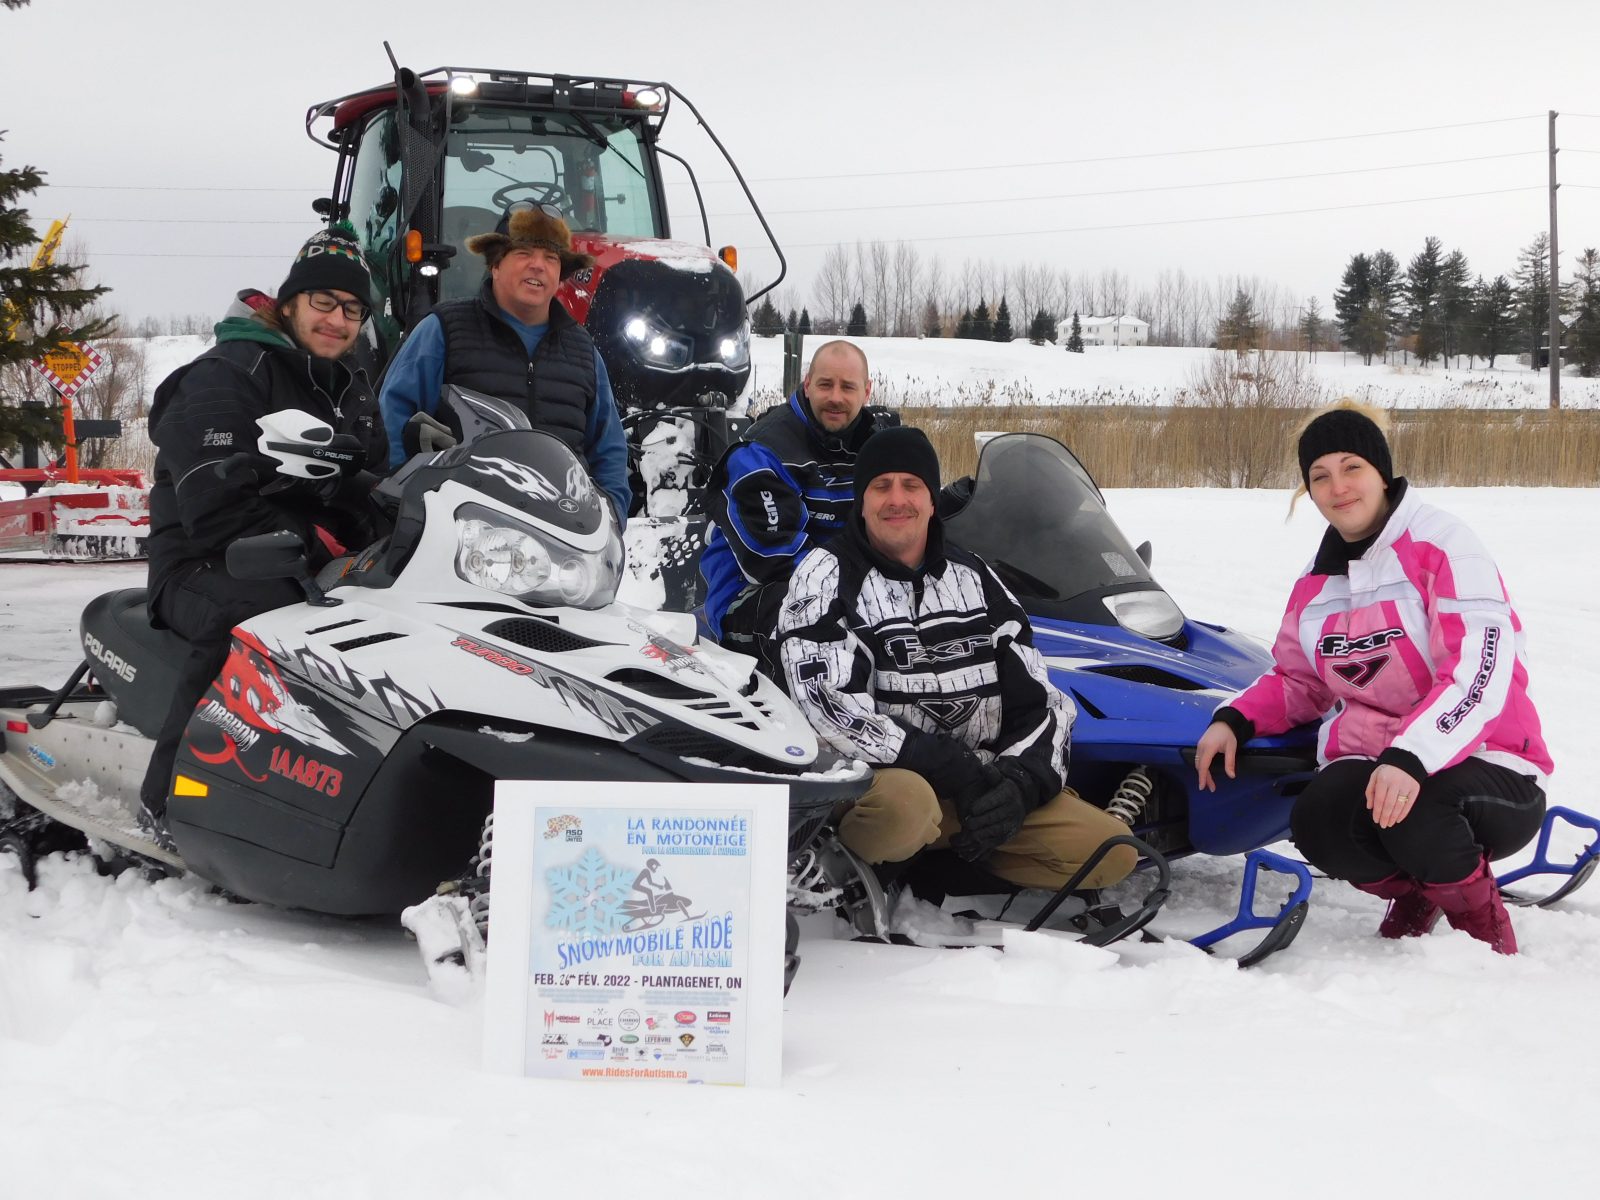 Snowmobile ride to support autism research